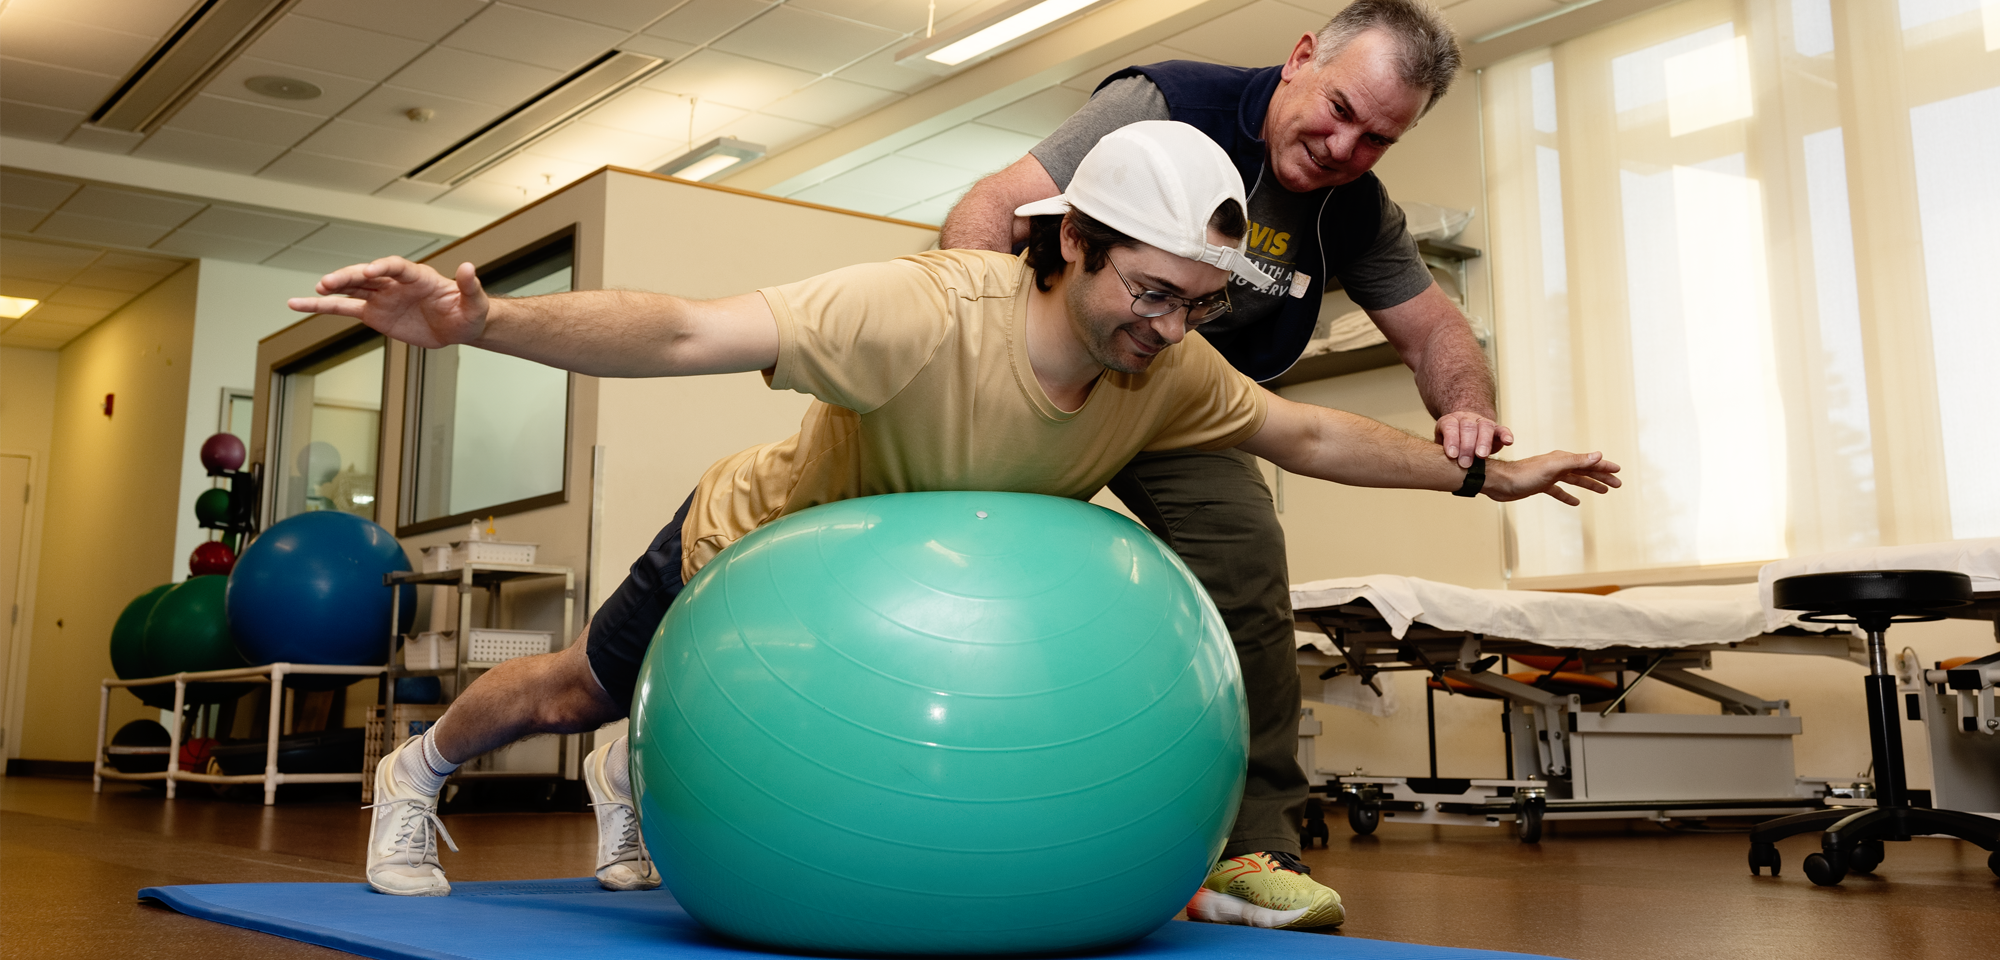 A Phystical Therapist works with a patient on an exercise ball.